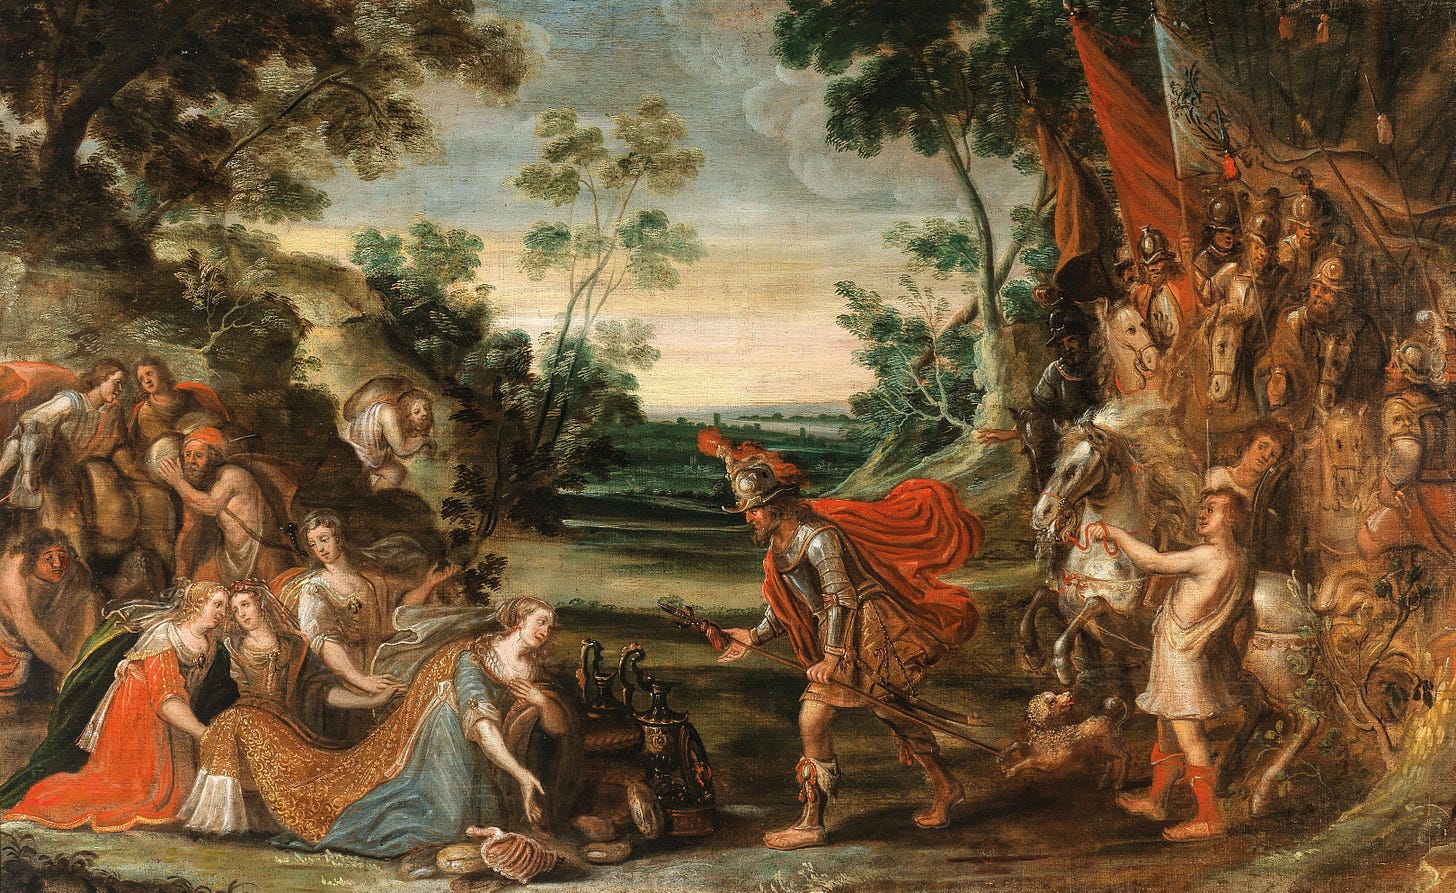 King Solomon and the Queen of Sheba by Frans Wouters (Flemish, 1612 - 1659)